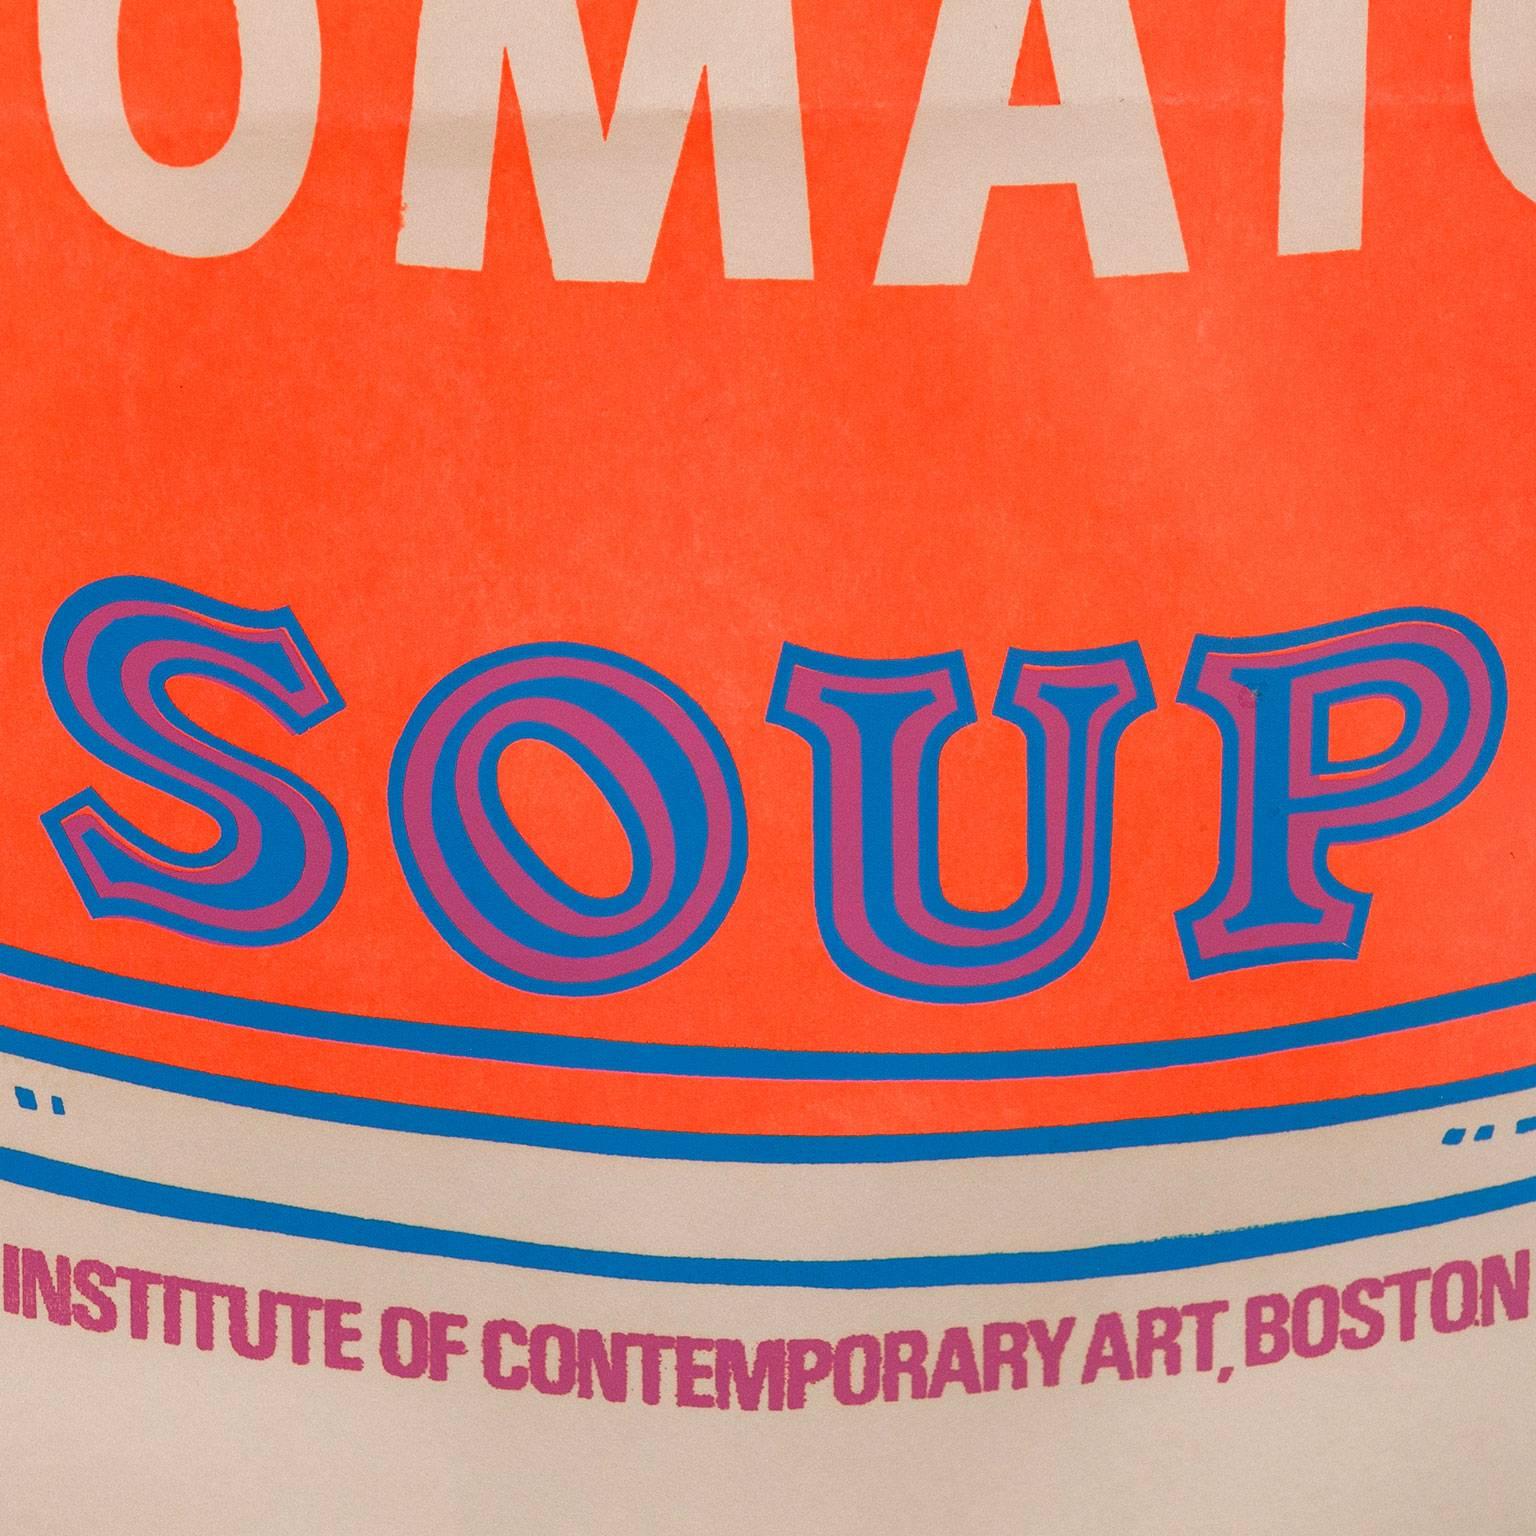 In 1962 Andy Warhol debuted his (soon to be infamous) Soup Can paintings as the Ferus Gallery in Los Angeles. While it was at first a commercial flop, in a short period of time the work would become an icon for the entire Pop Art movement and the